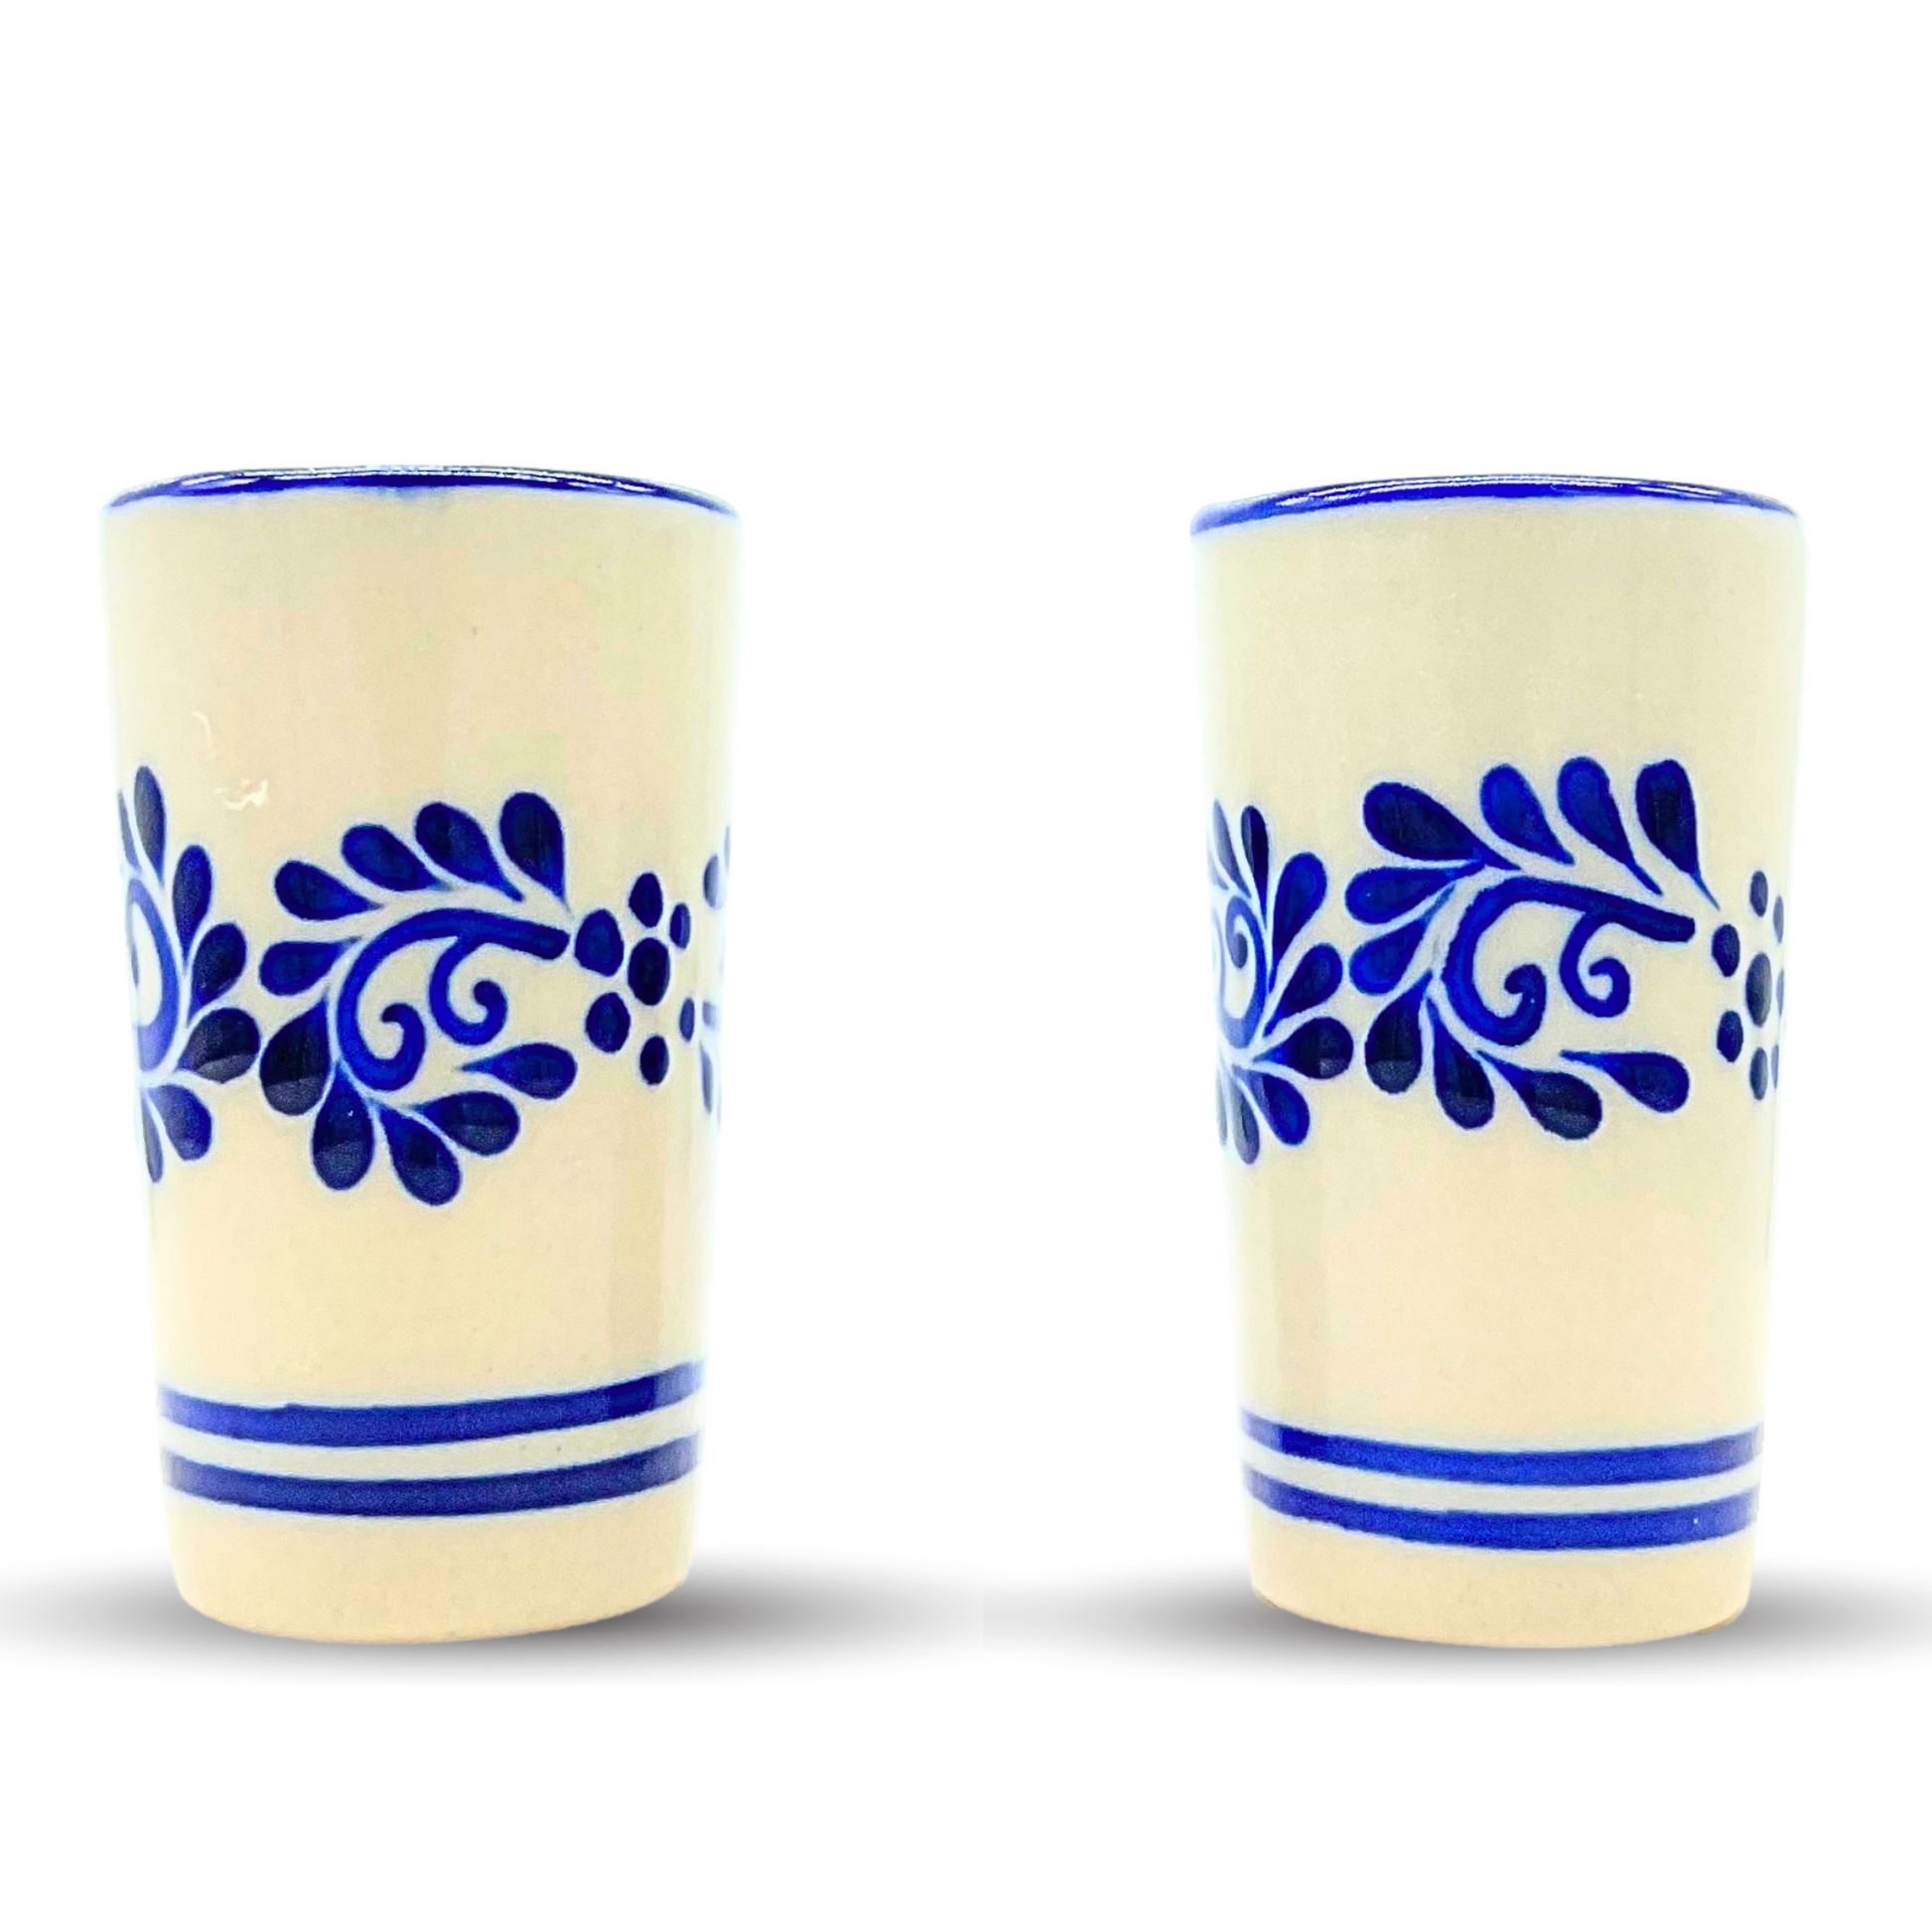 A set of two vibrant, hand-painted Mexican ceramic shot glasses, perfect for serving tequila or mezcal.